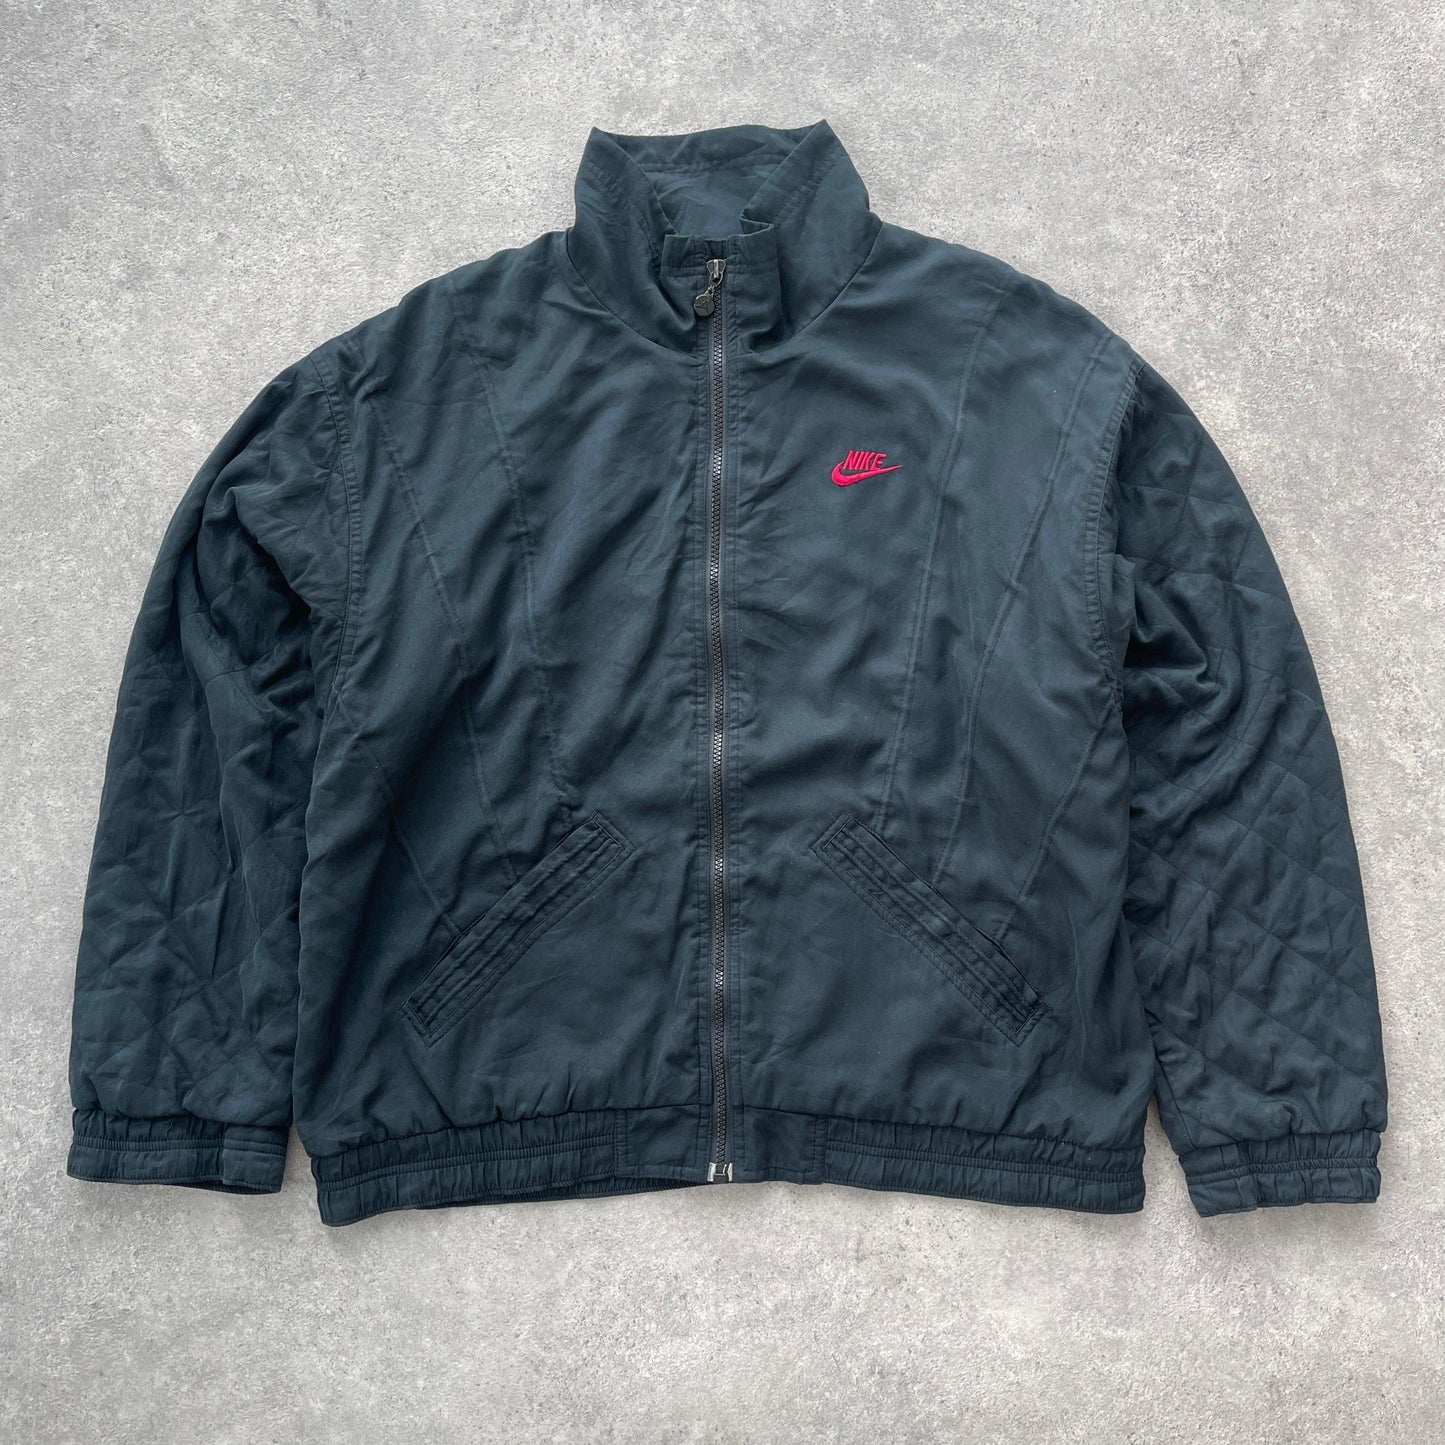 Nike 1990s Air Jordan quilted track jacket (L) - Known Source